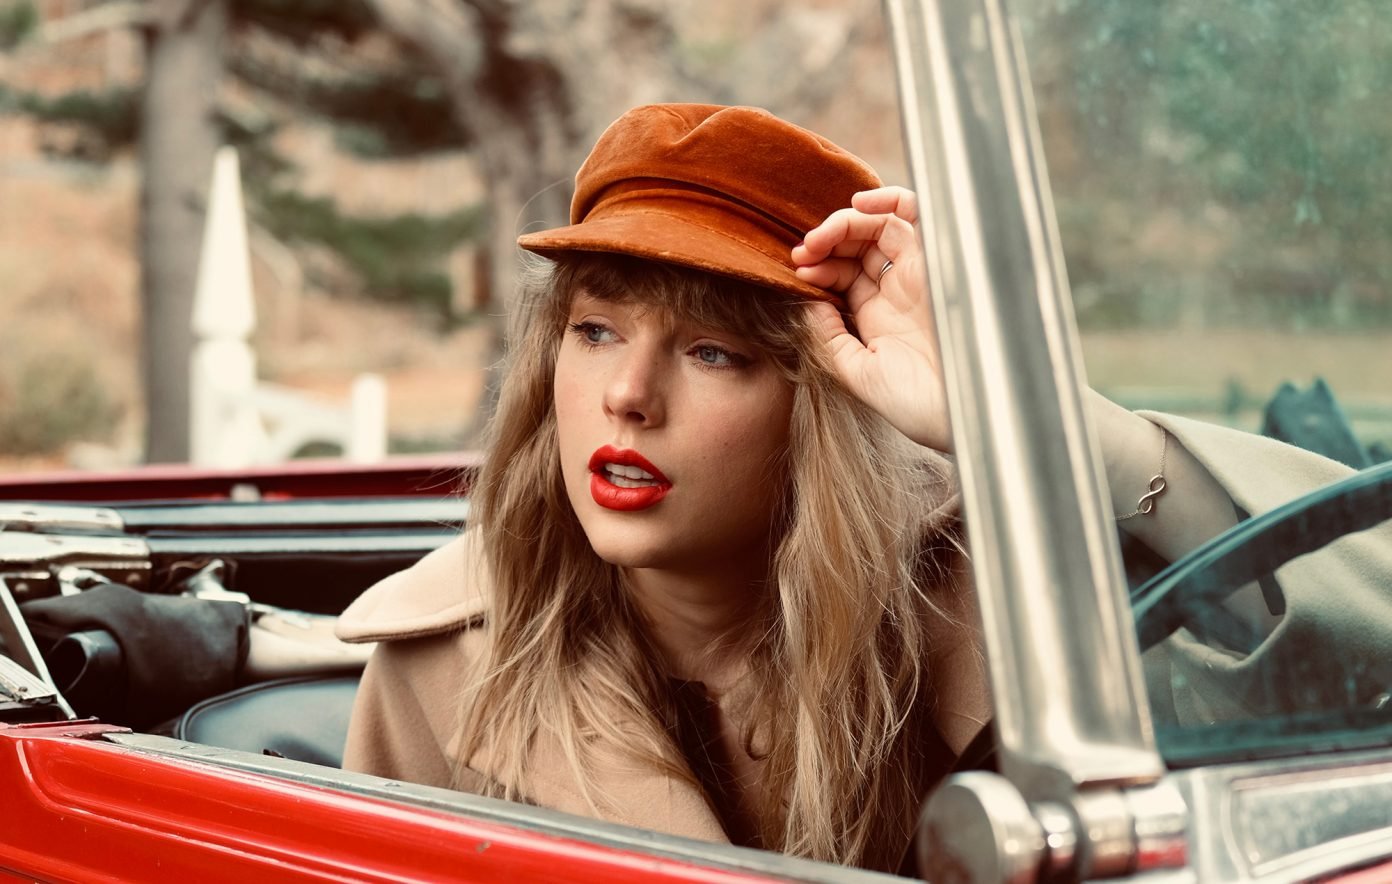 In honor of Red (Taylor's version) here is Reputation Taylor with